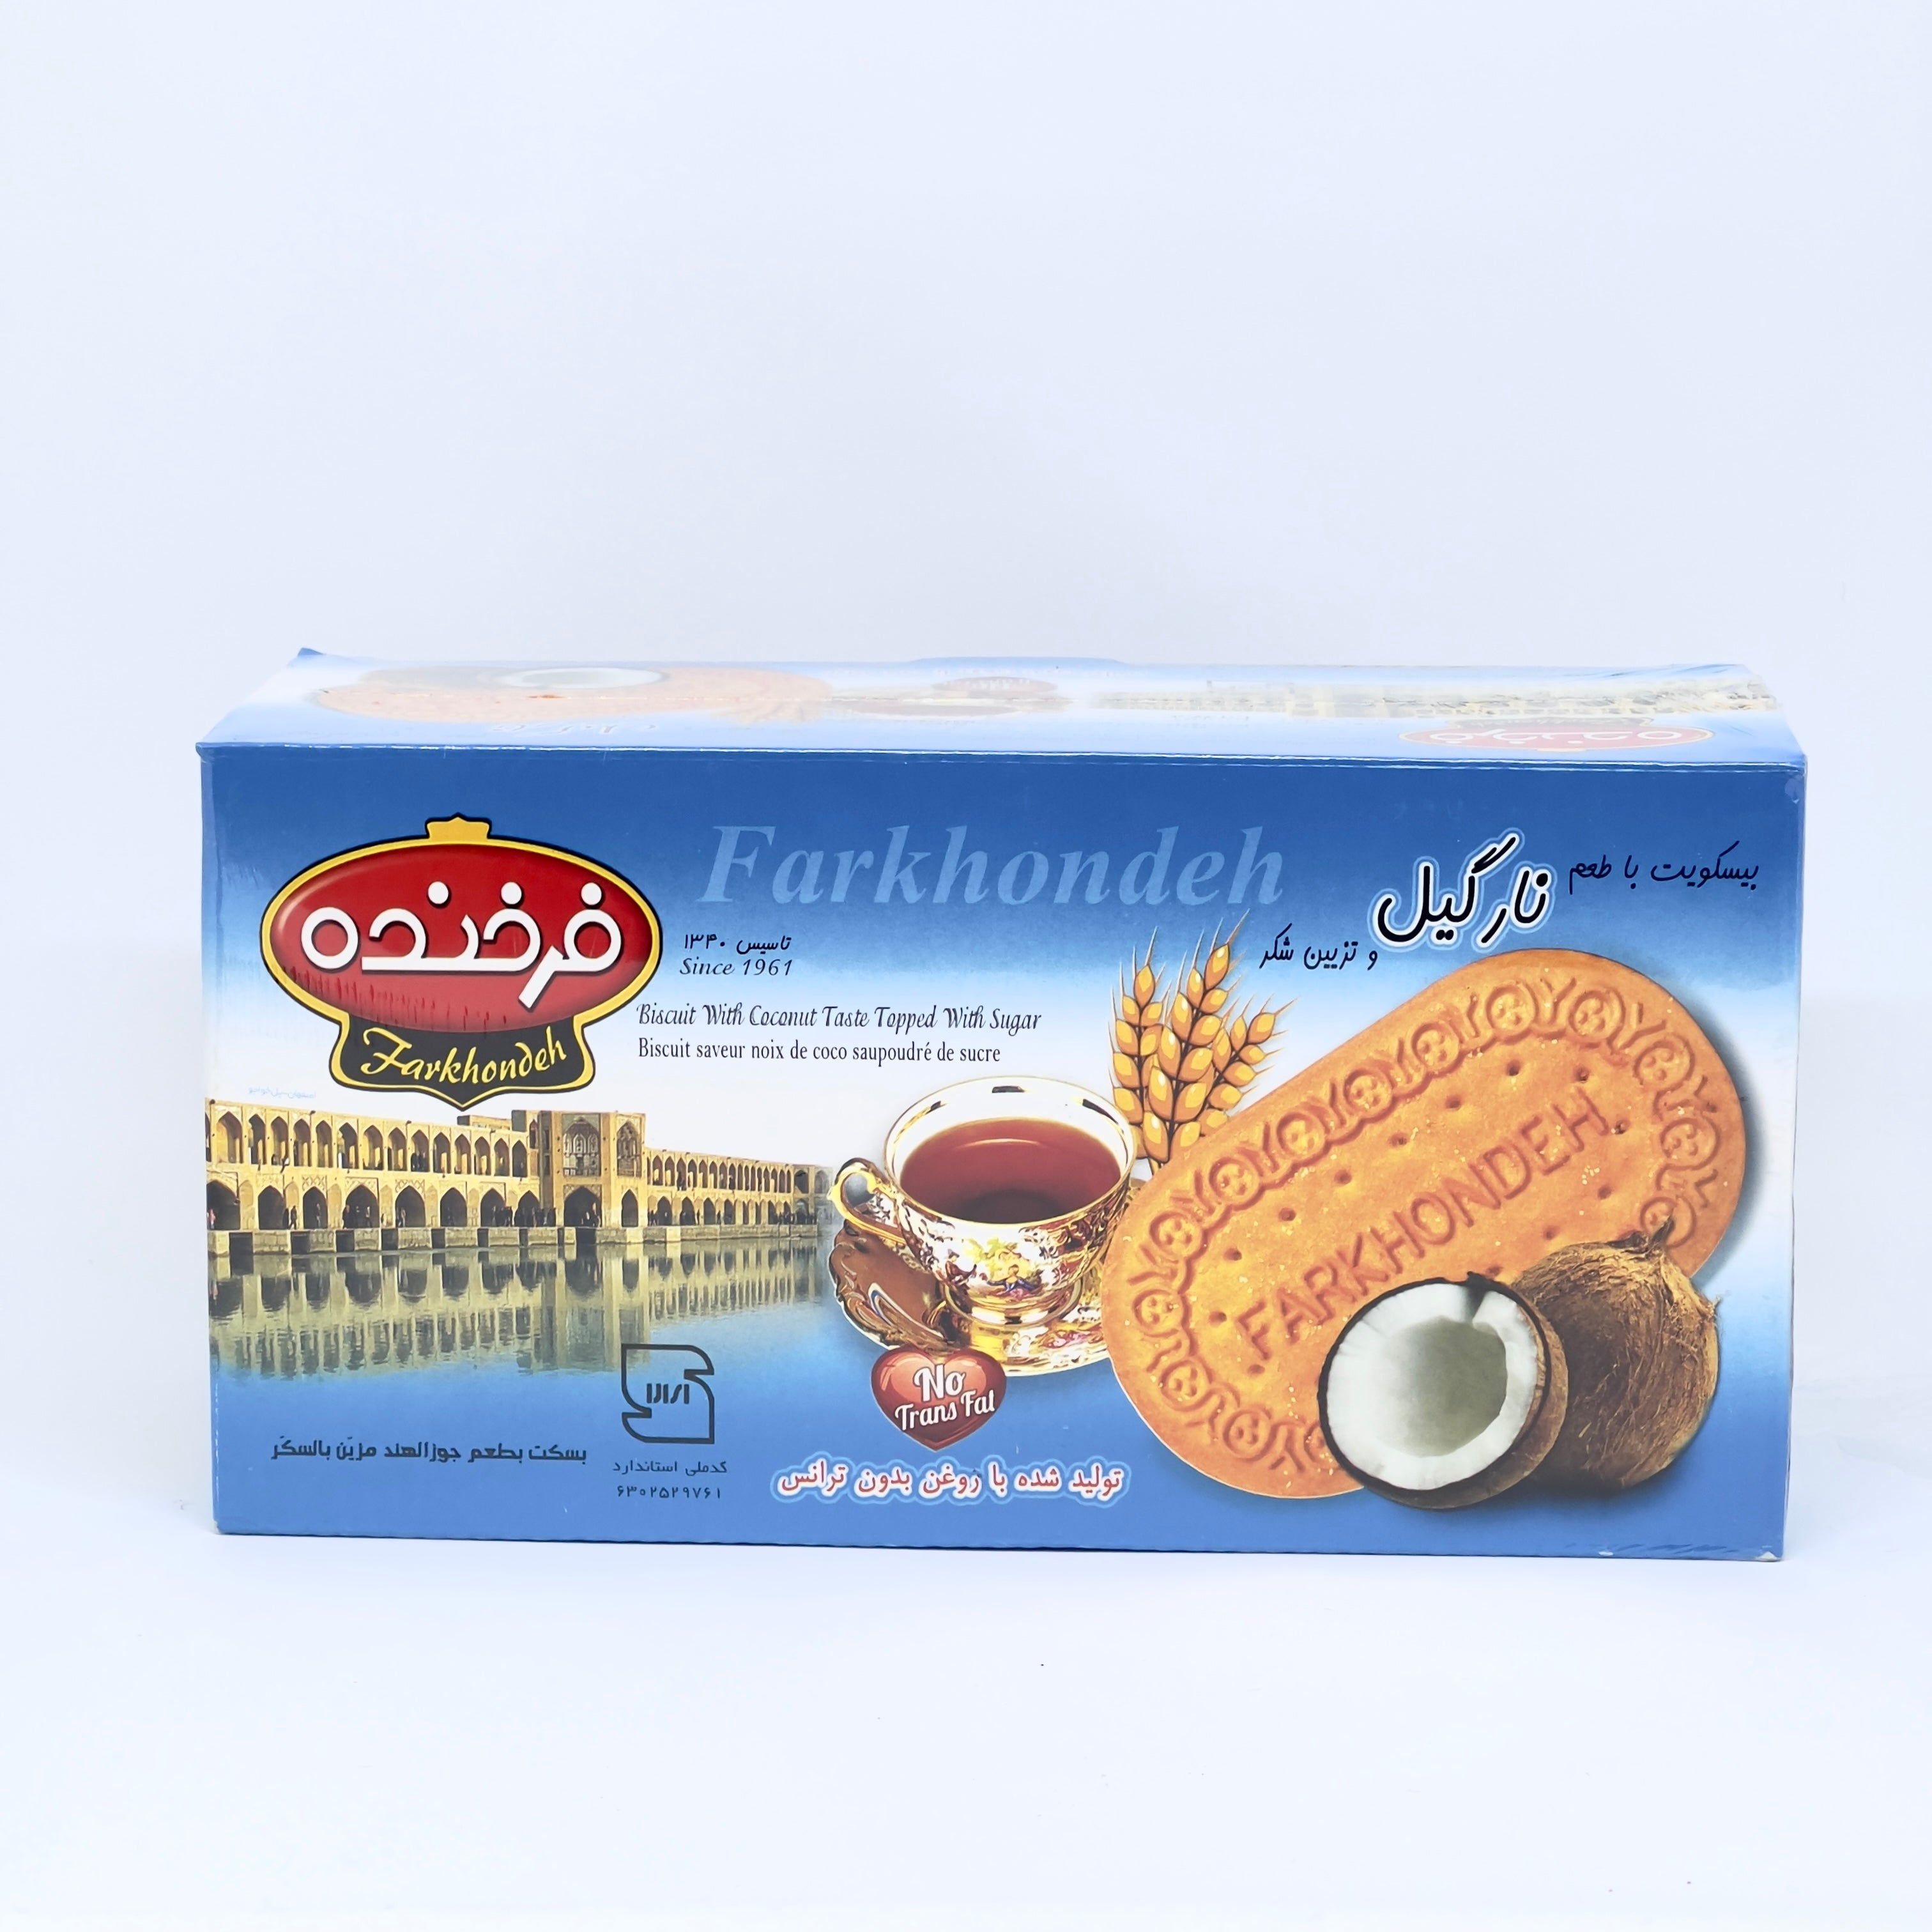 FARKHONDEH Coconut w/ Sugar Biscuits 900g